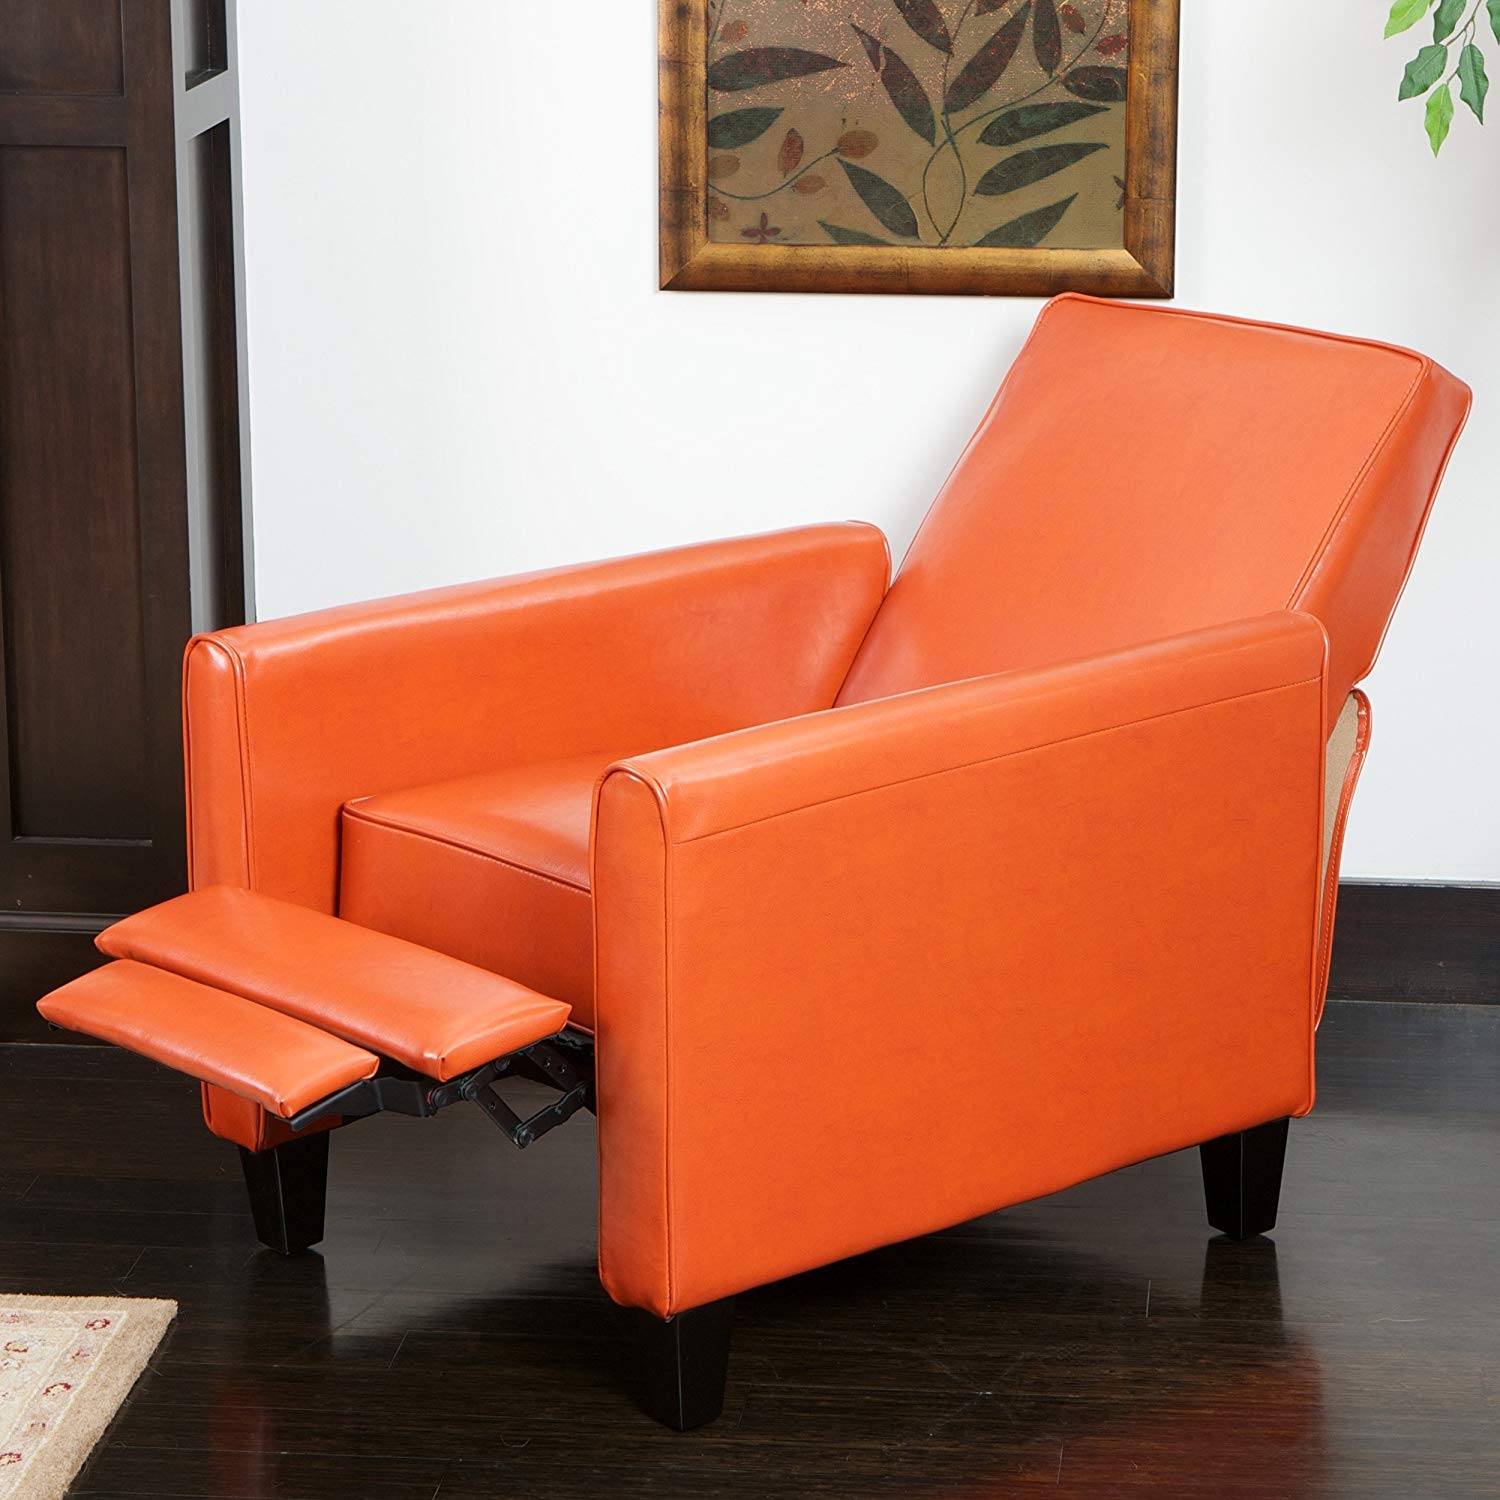 Christopher Knight Home Darvis Orange Leather Recliner Club Chair